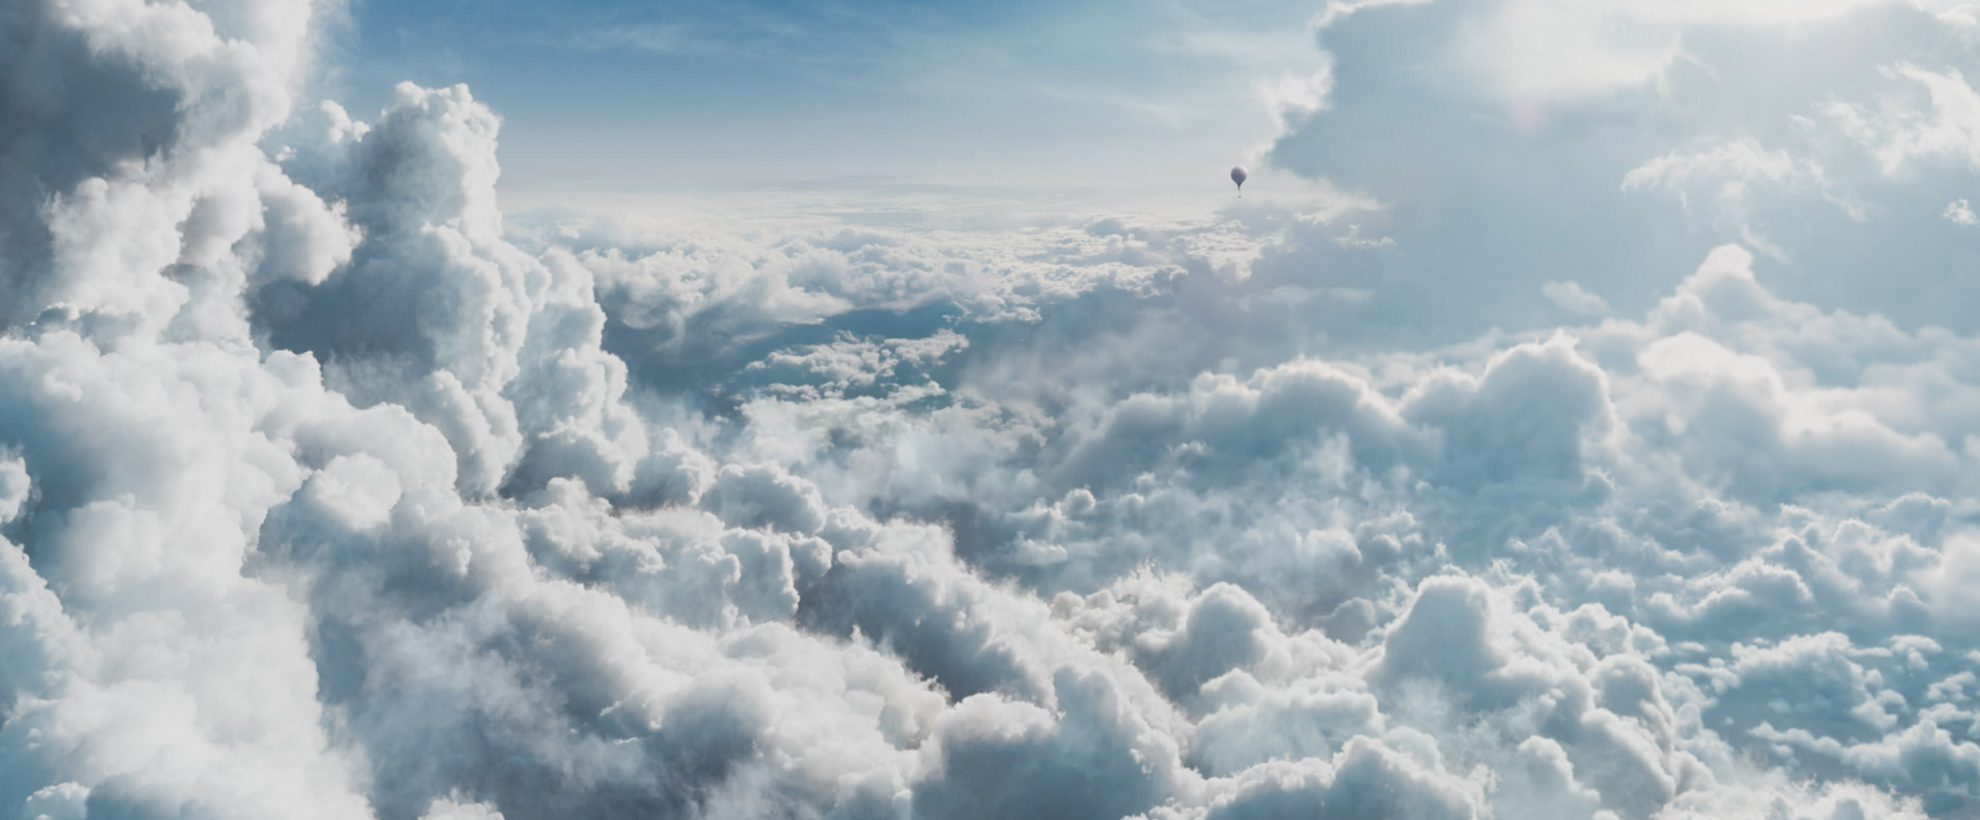 A vast sky above the clouds, with a tiny hot air balloon in the background